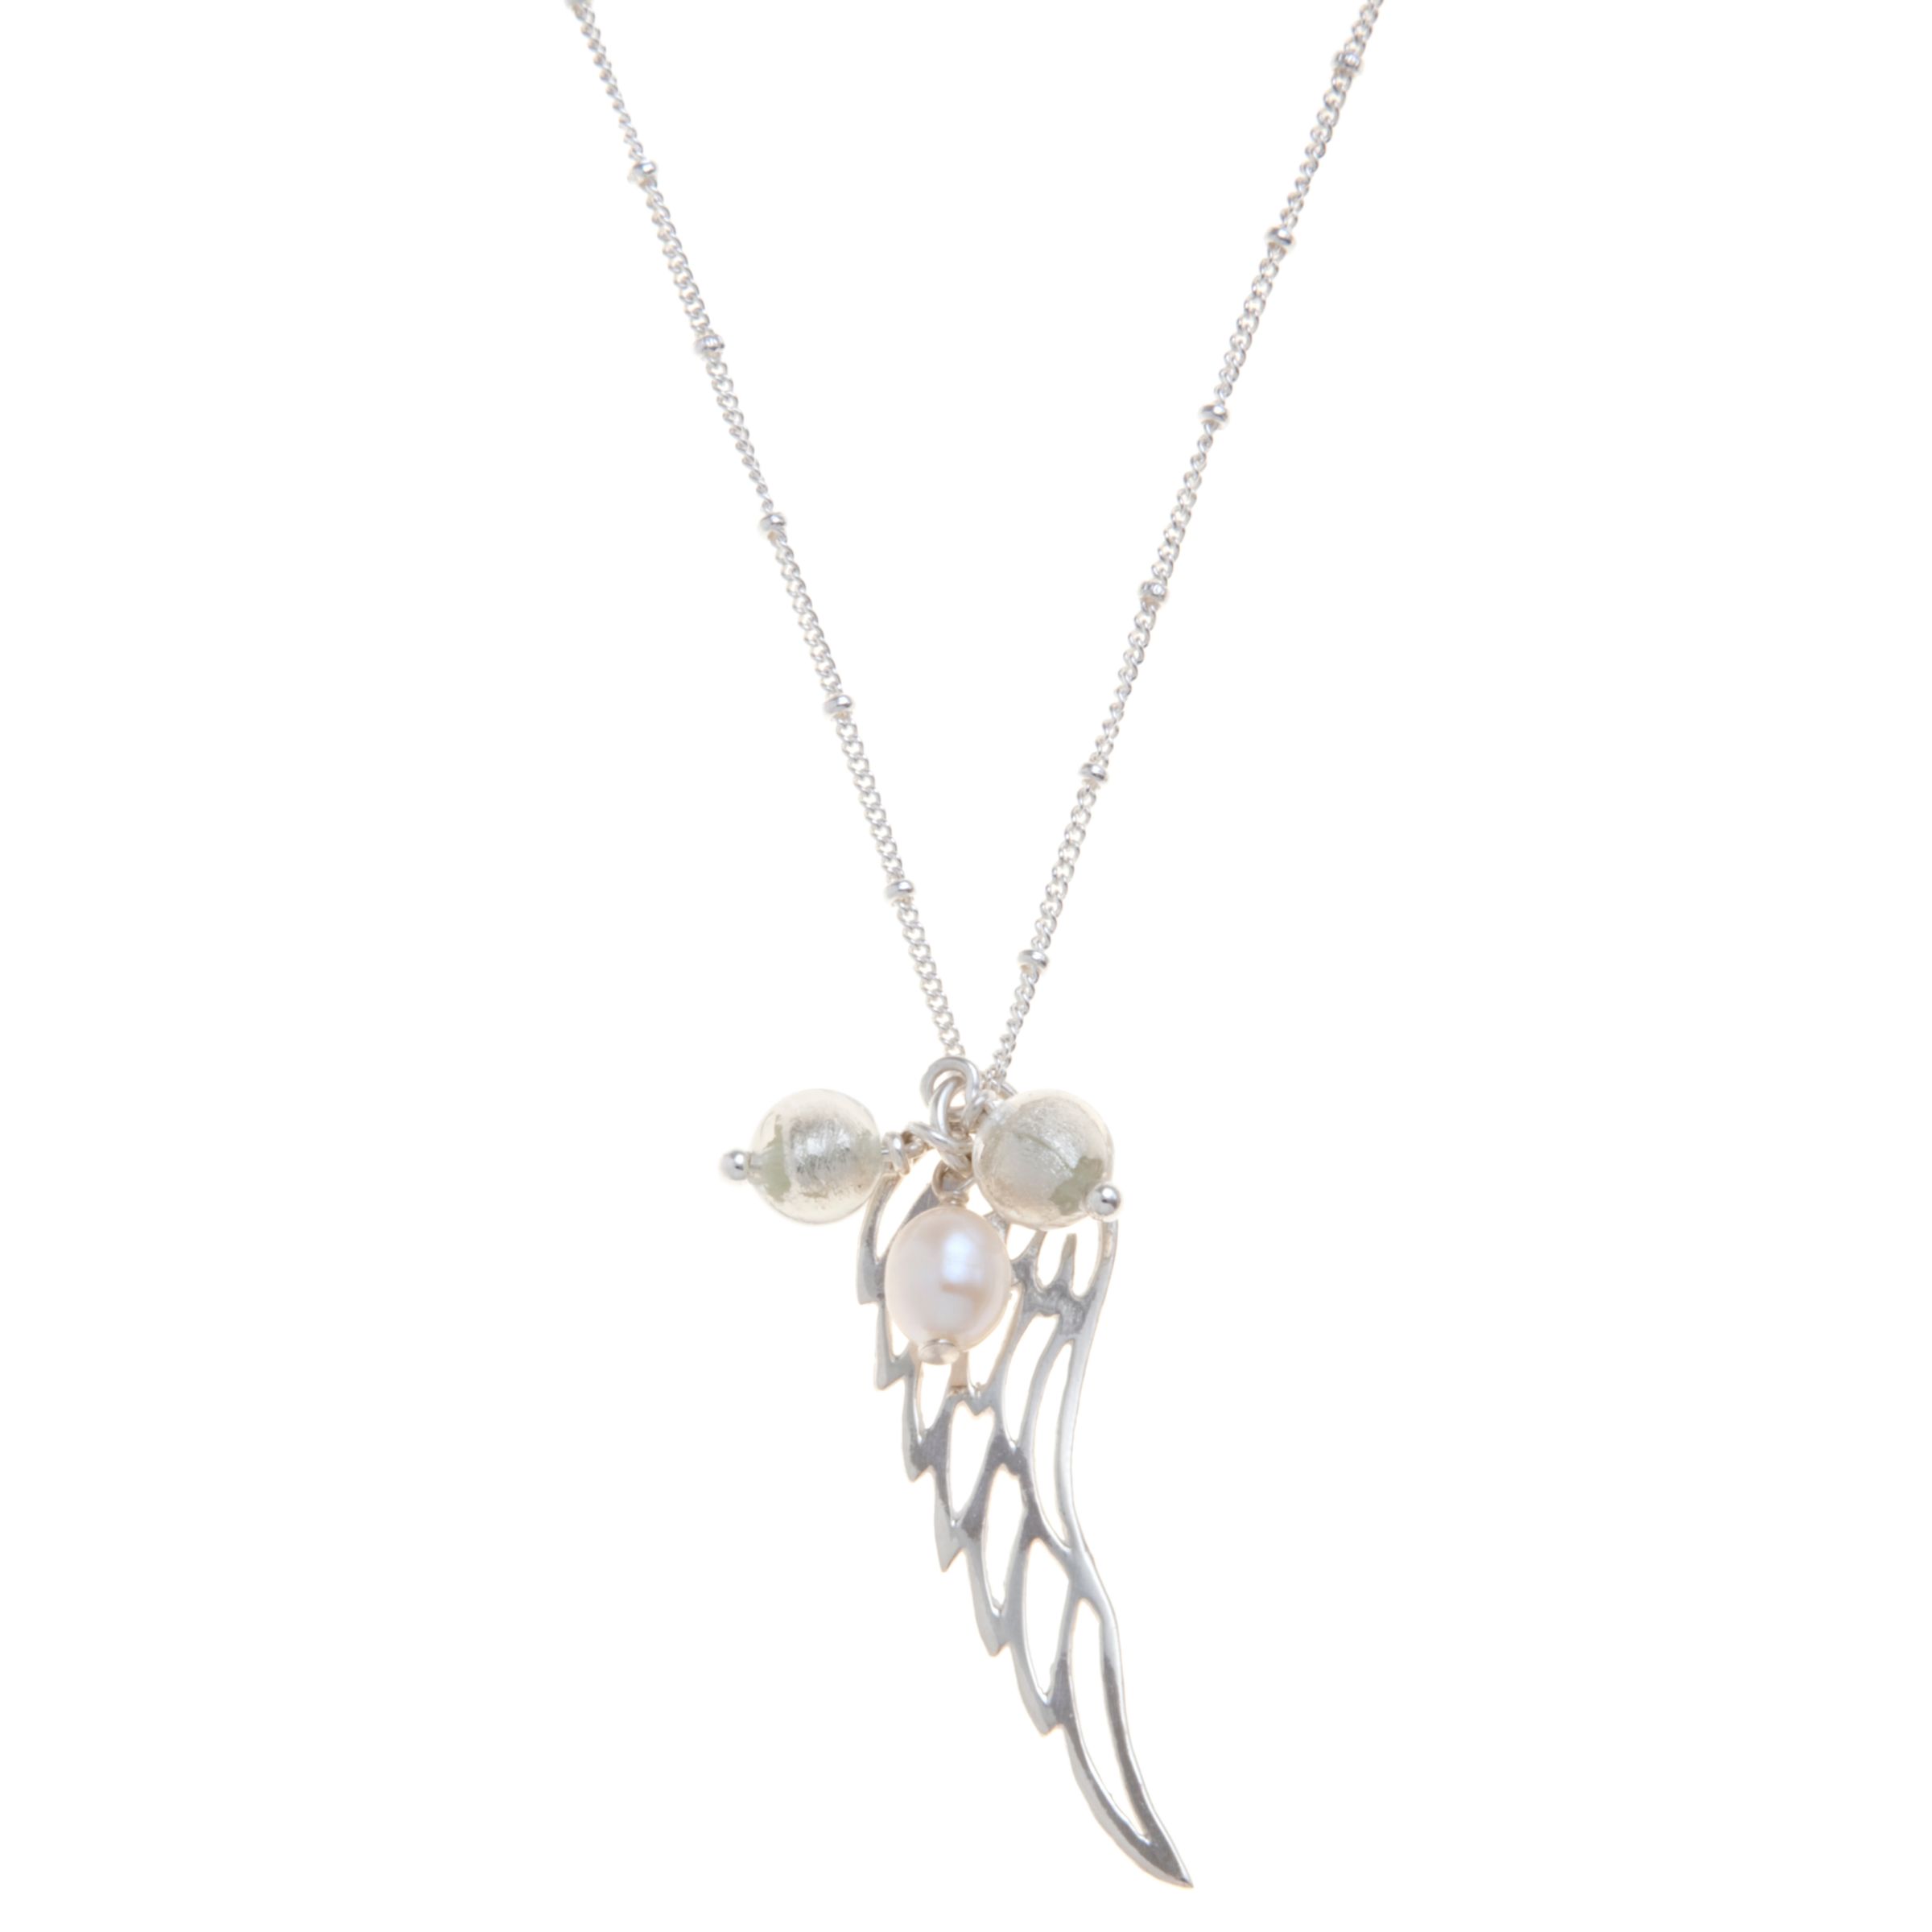 Martick Angel Wing Pendant Necklace, Silver/White